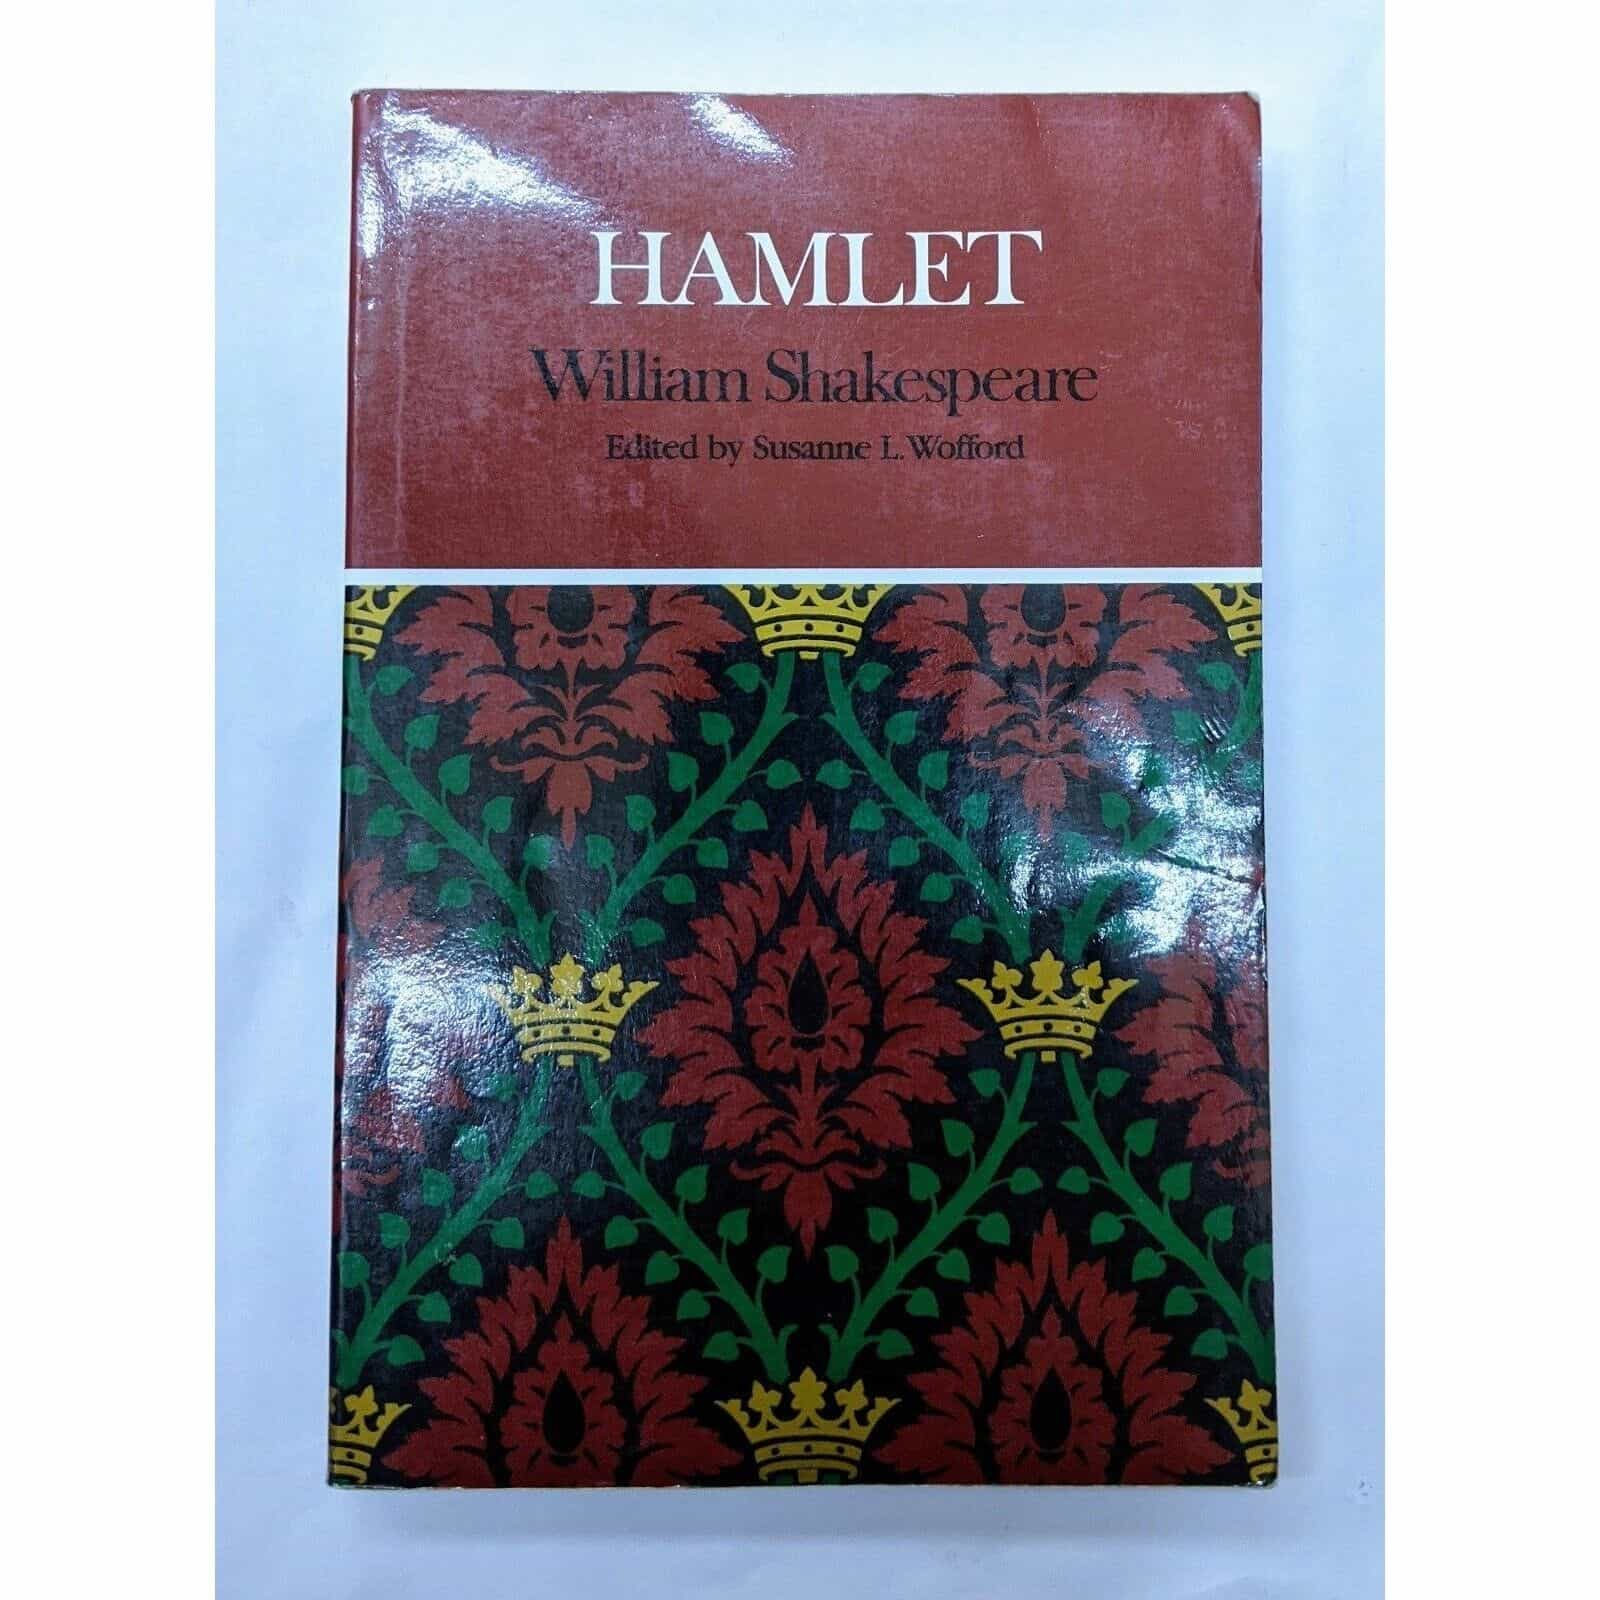 Hamlet by William Shakespeare edited by Susanne L. Wofford Book